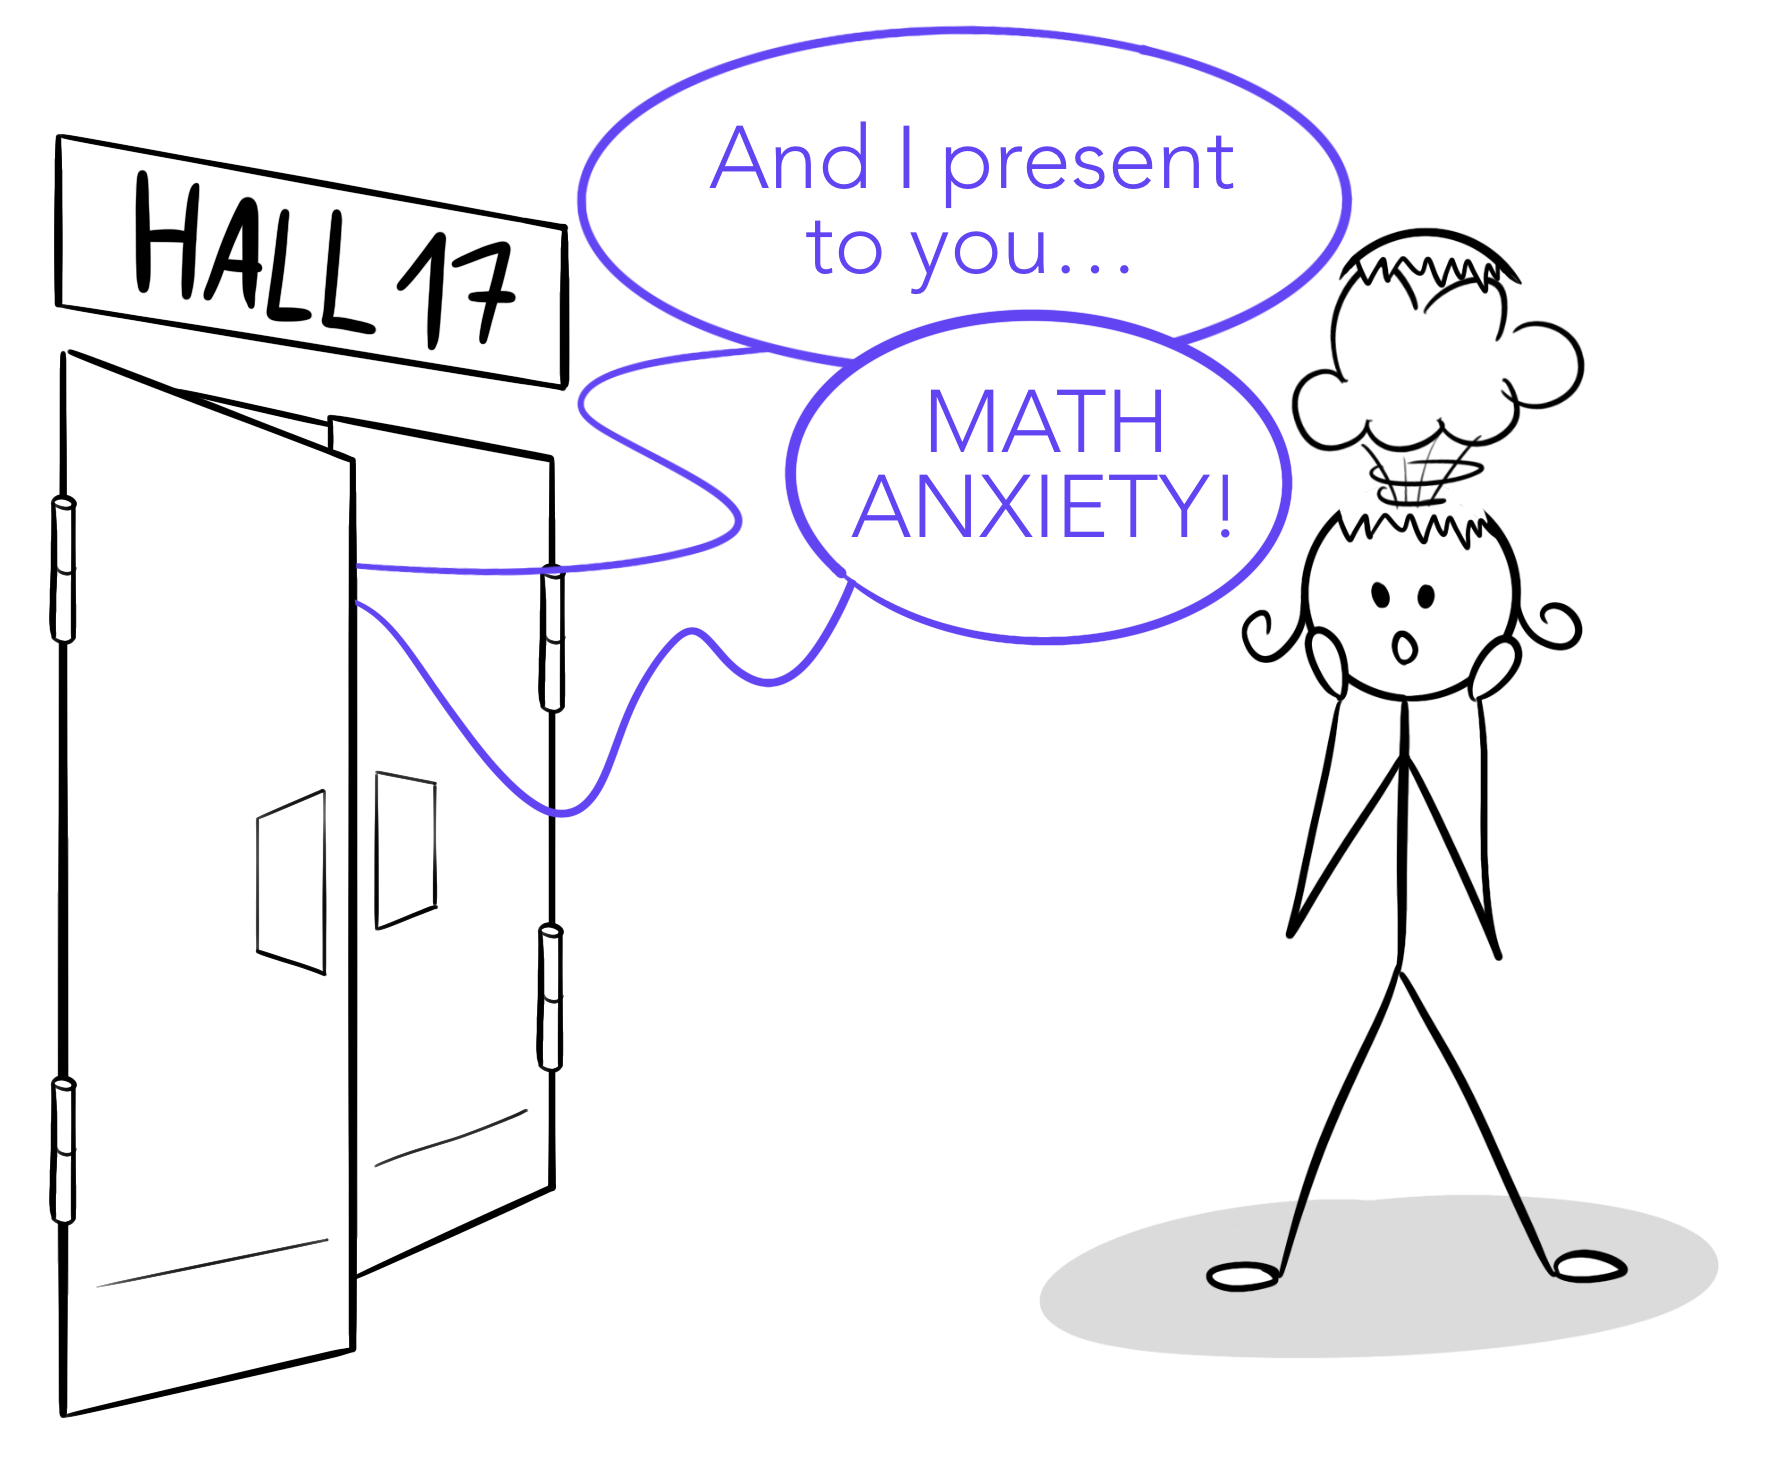 a doodle of venera walking in front a the hall of a conference where they are discussing math anxiety and her mind is blown away.